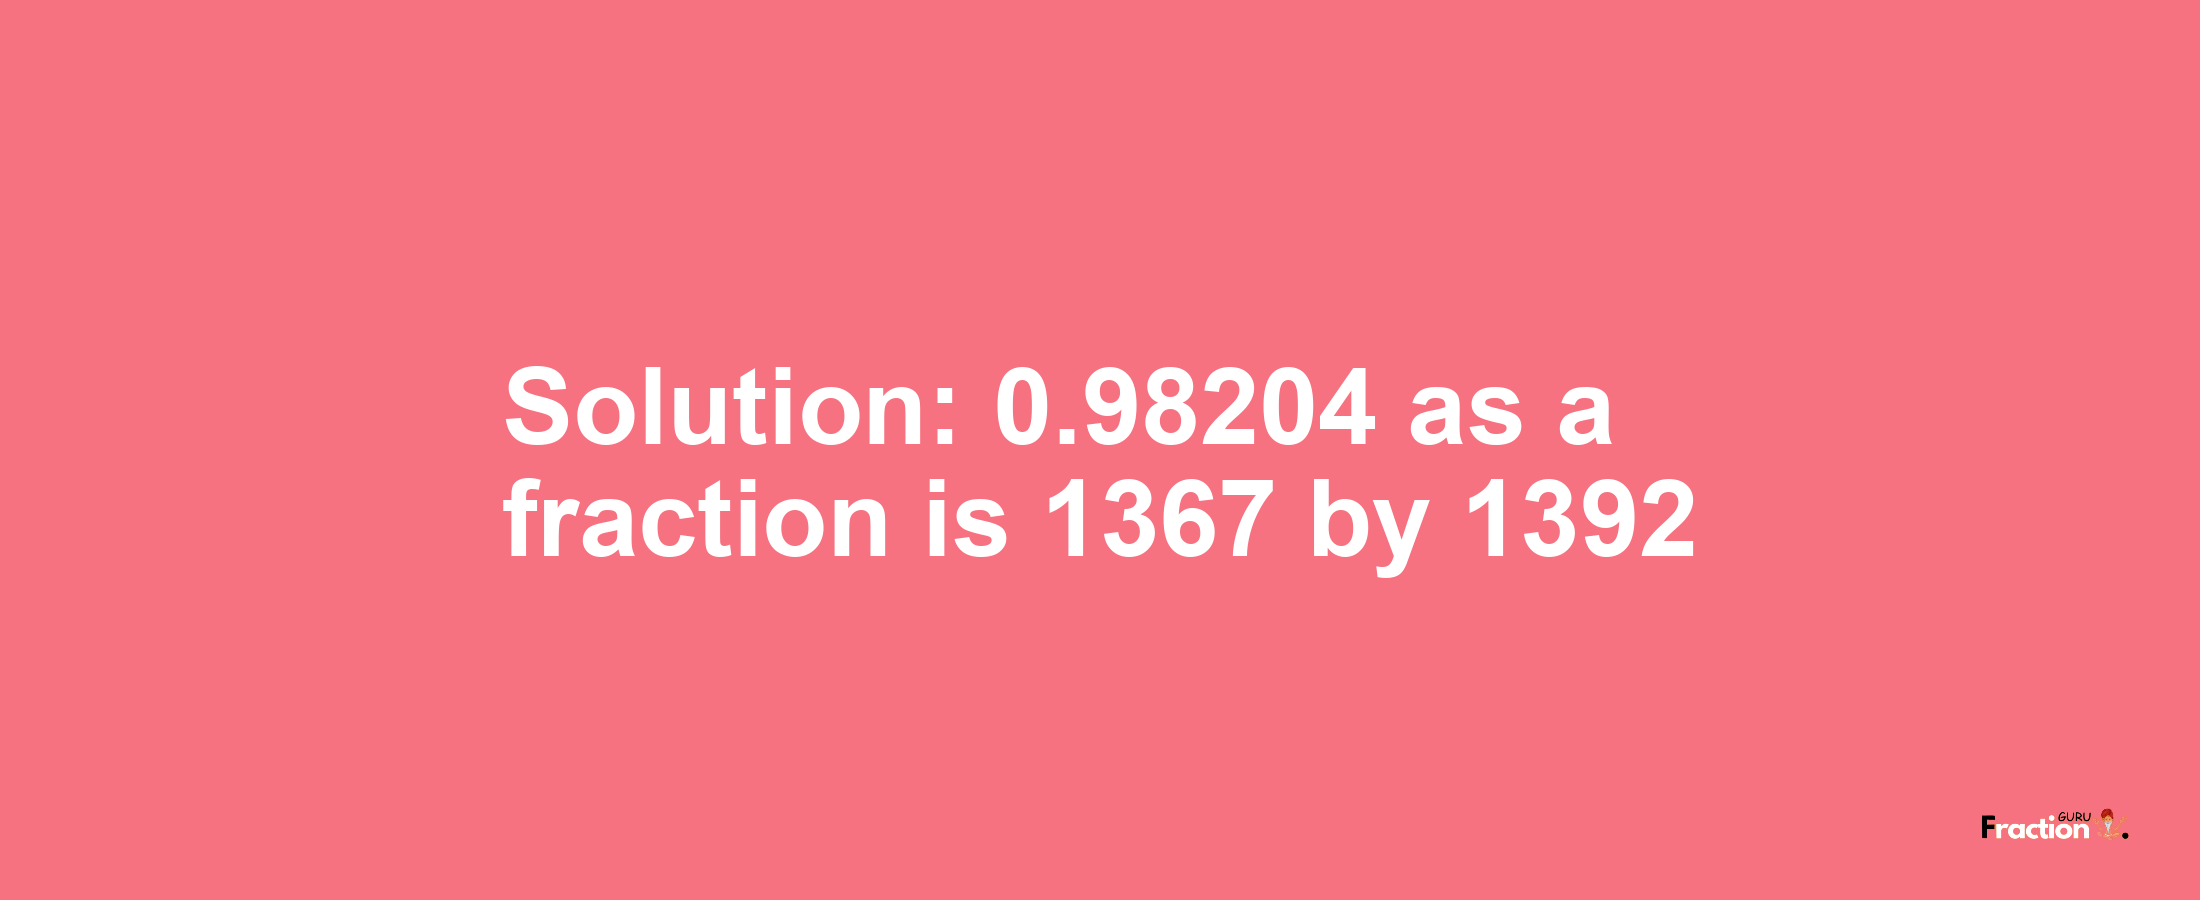 Solution:0.98204 as a fraction is 1367/1392